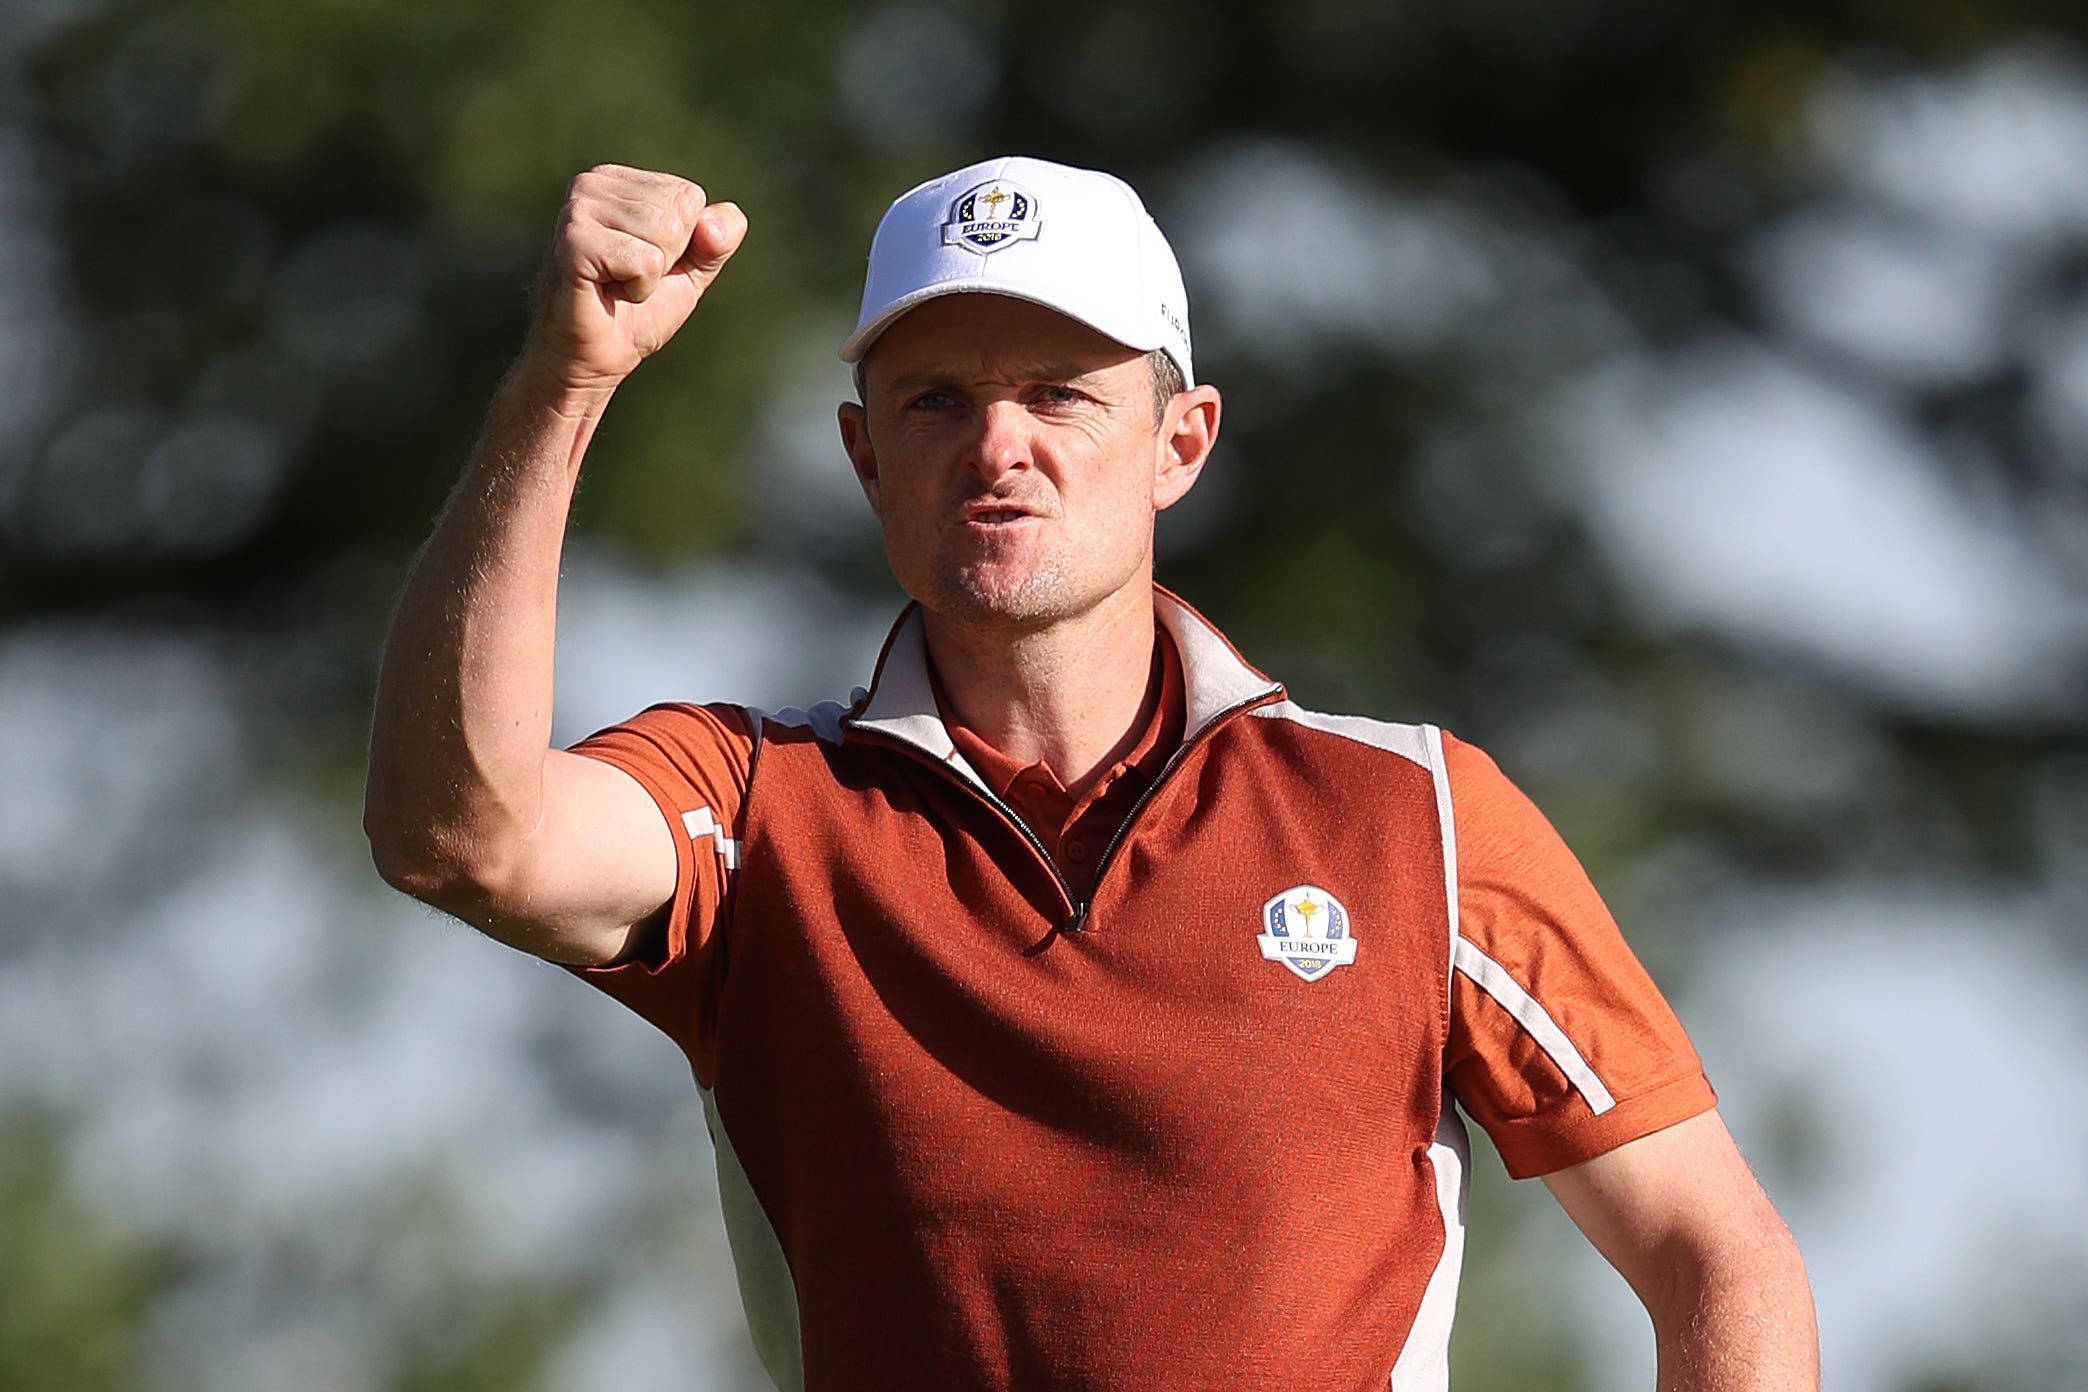 Justin Rose is hoping to make a sixth Ryder Cup appearance in Rome